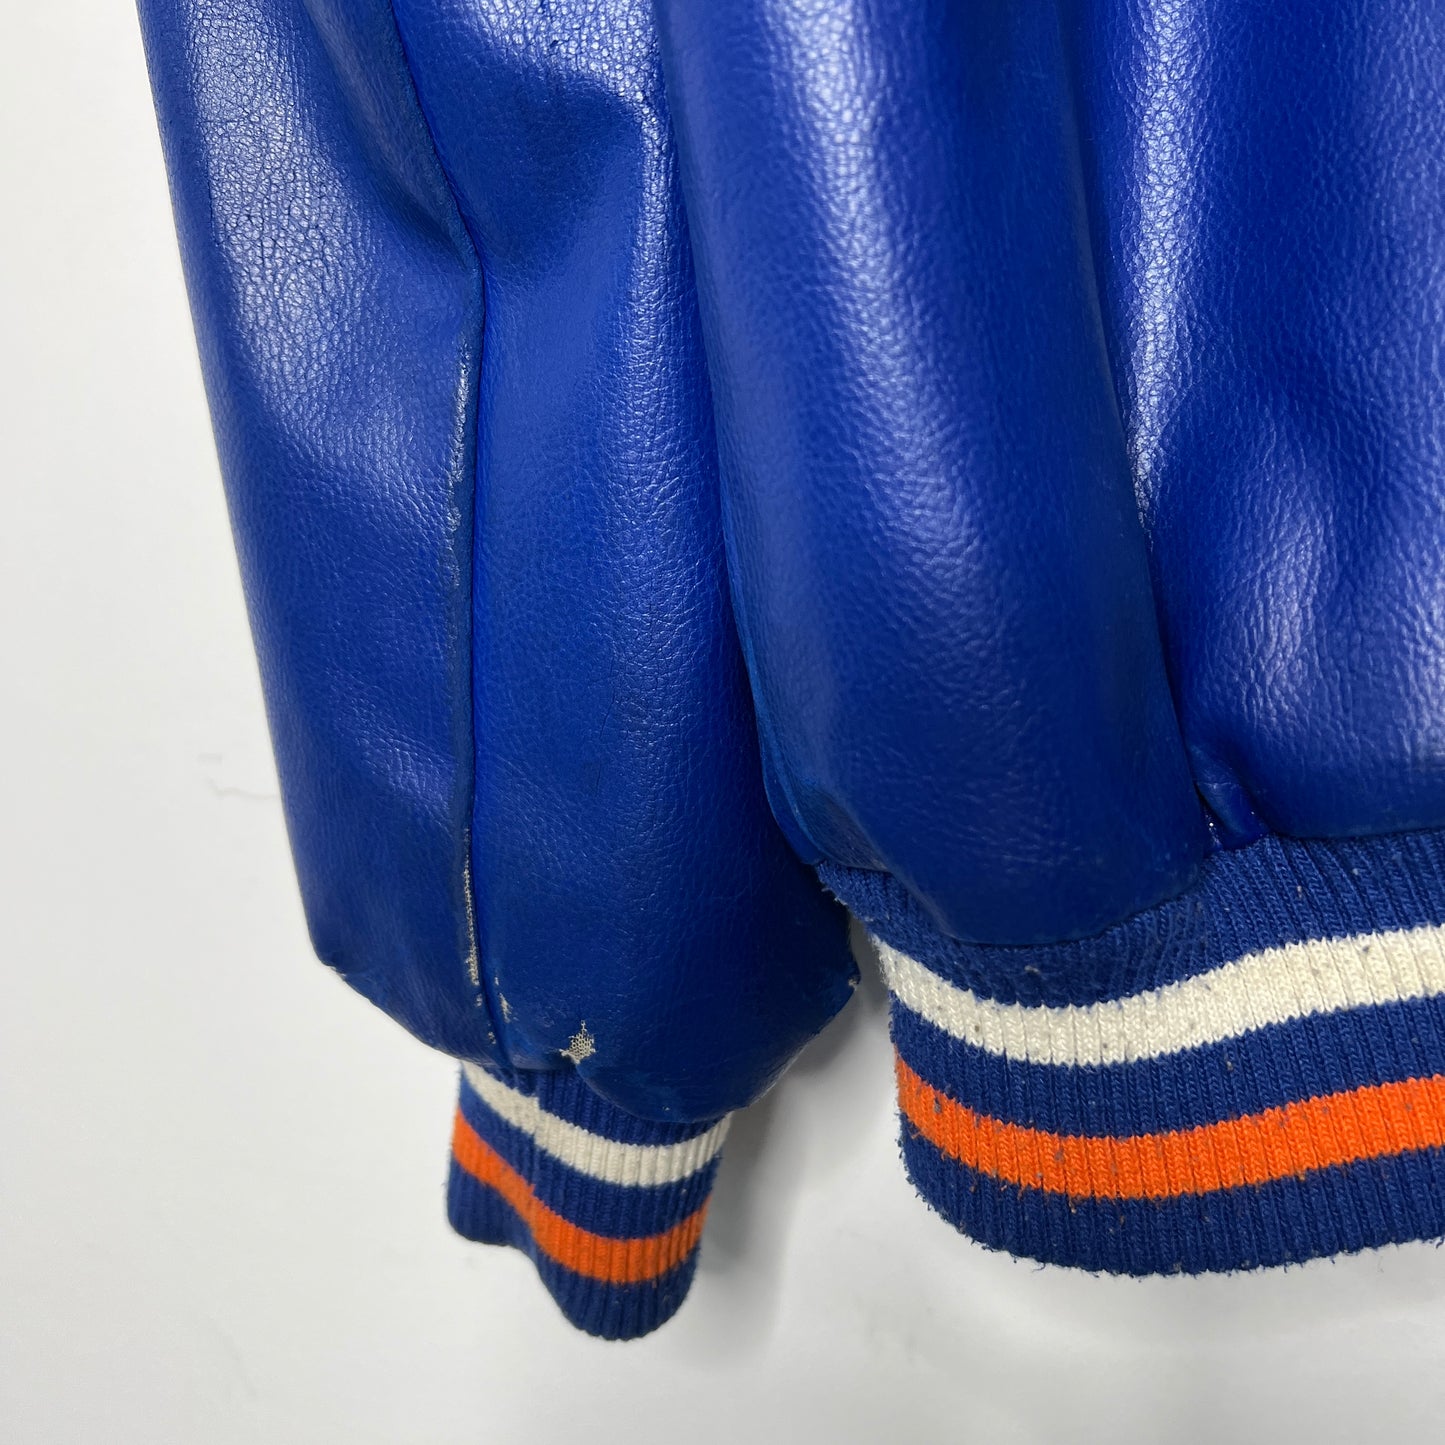 NY Mets Leather-look Jacket